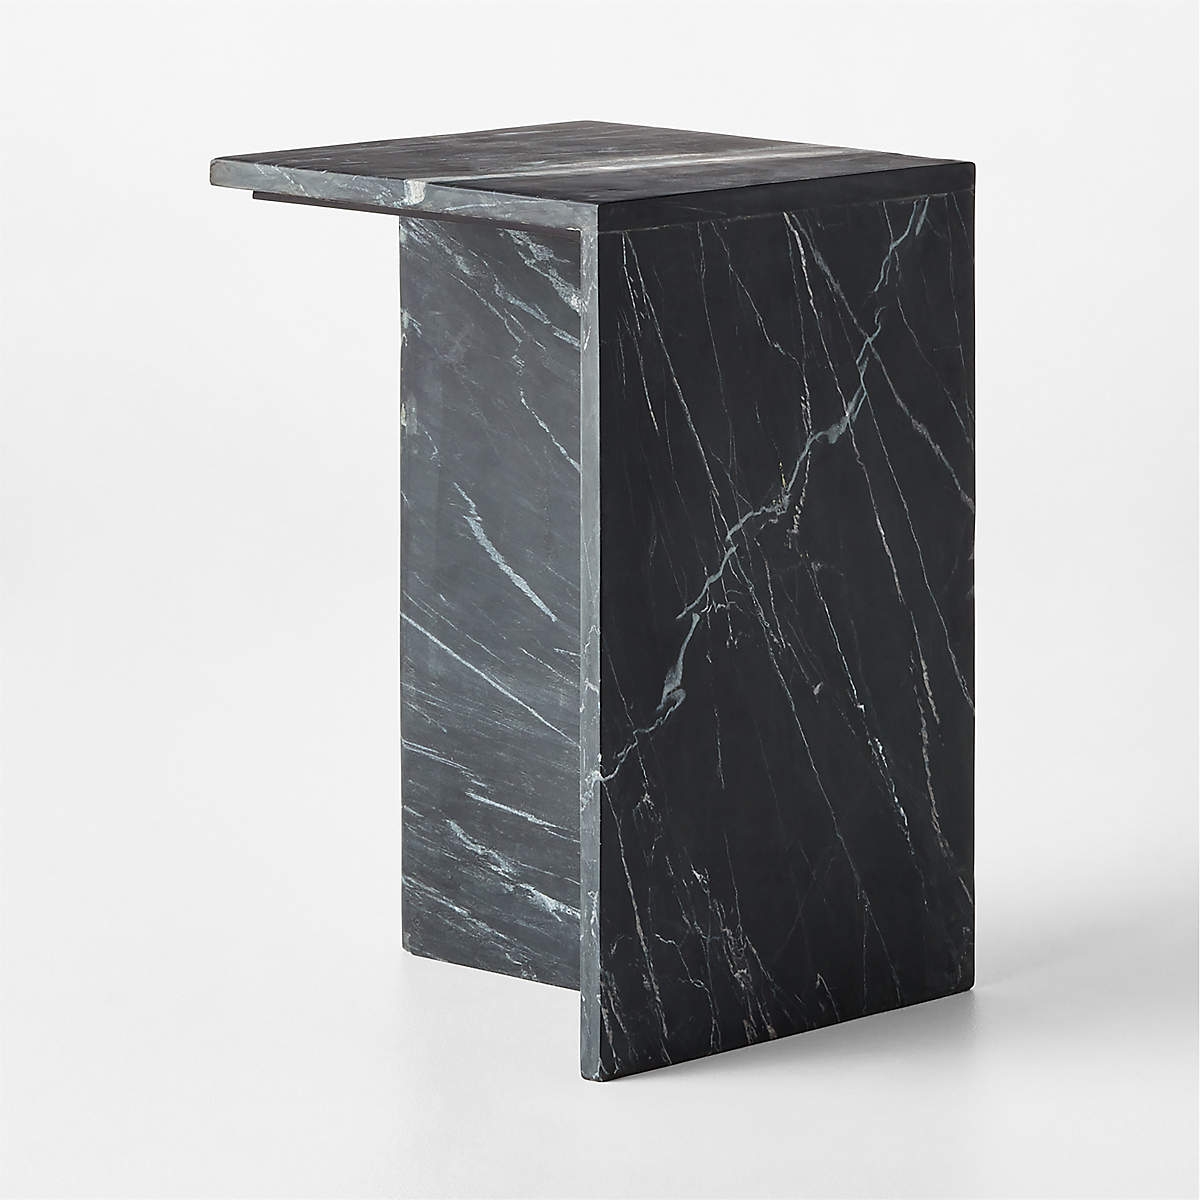 T Black Marble Tall Table - Image 2